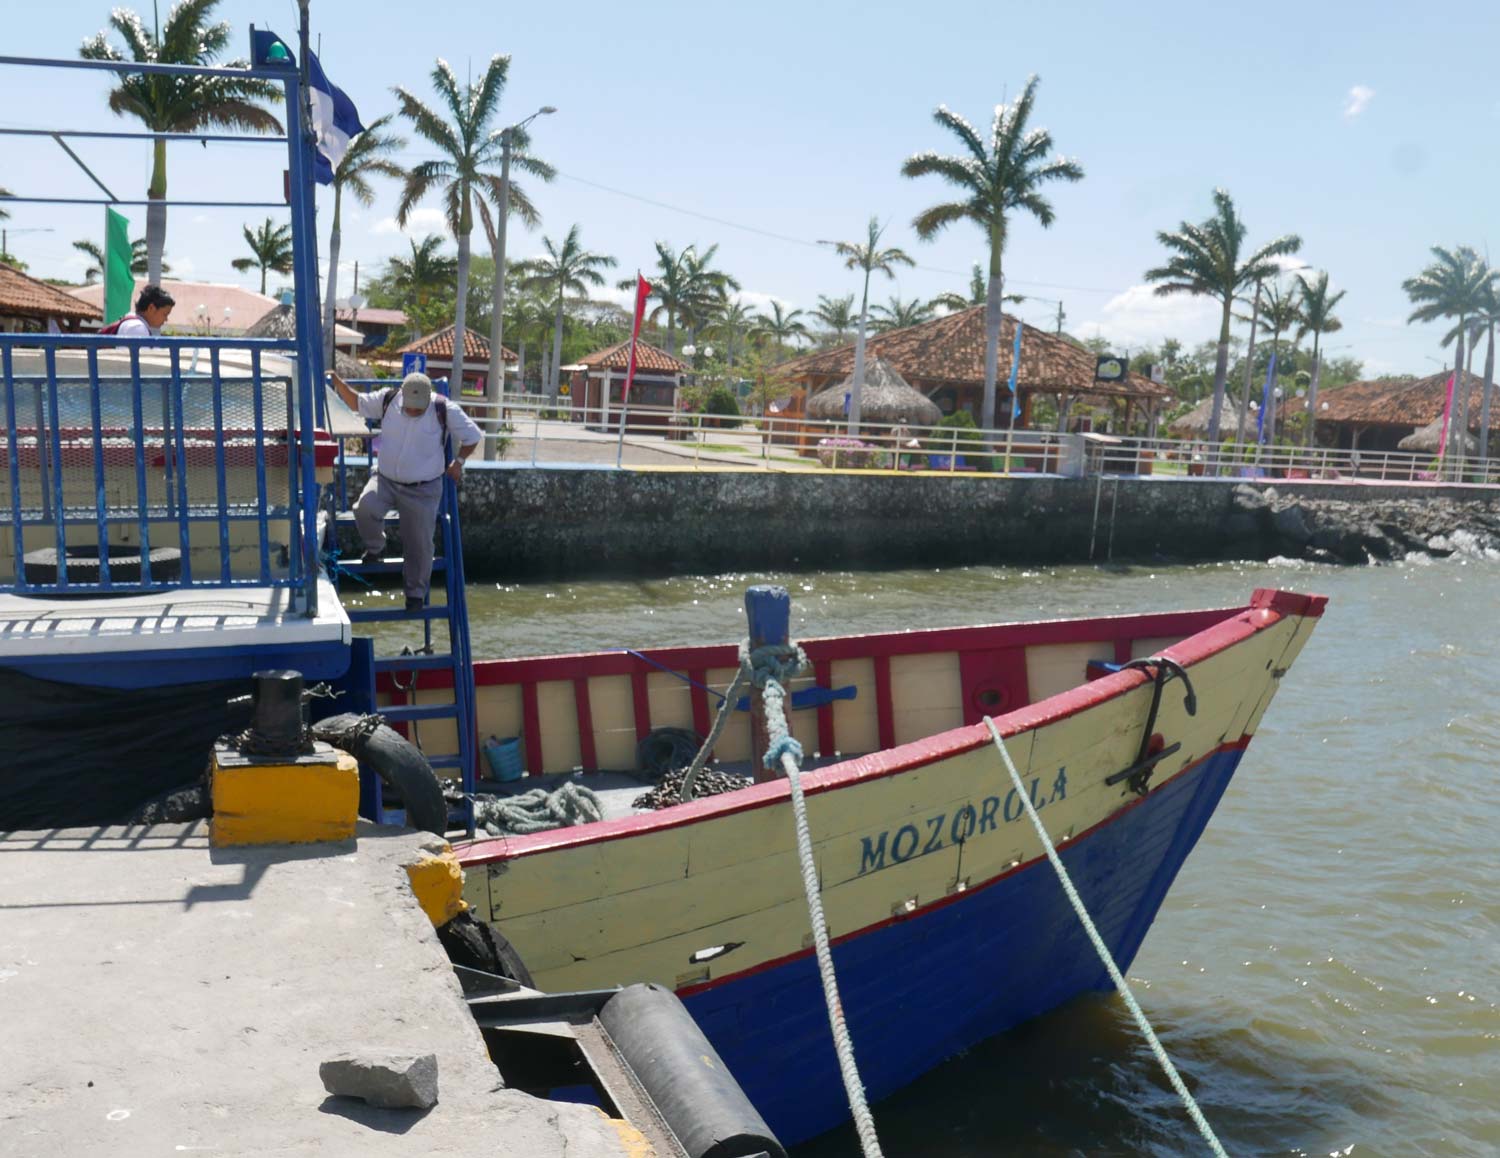 The small boat that took us from Rivas to Ometepe island